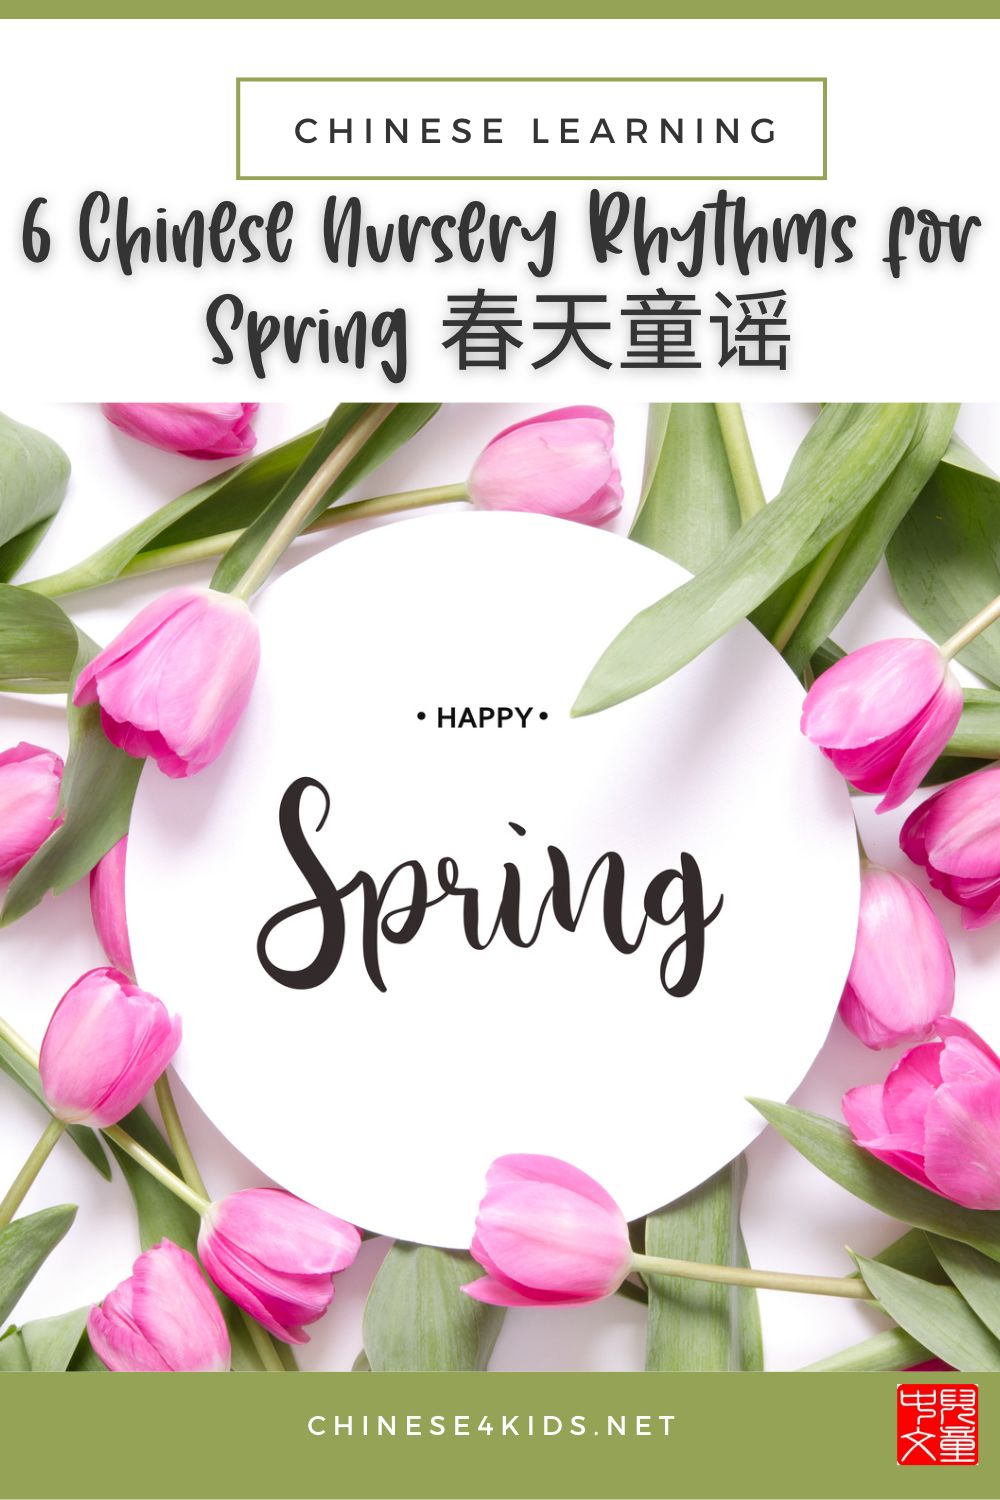 These 6 cheerful Chinese nursery rhythms are great for kids to learn during spring. #Chinese4kids #Chinesenurseryrhythm #spring #Chineseforkids #learnChinese #MandarinChinese